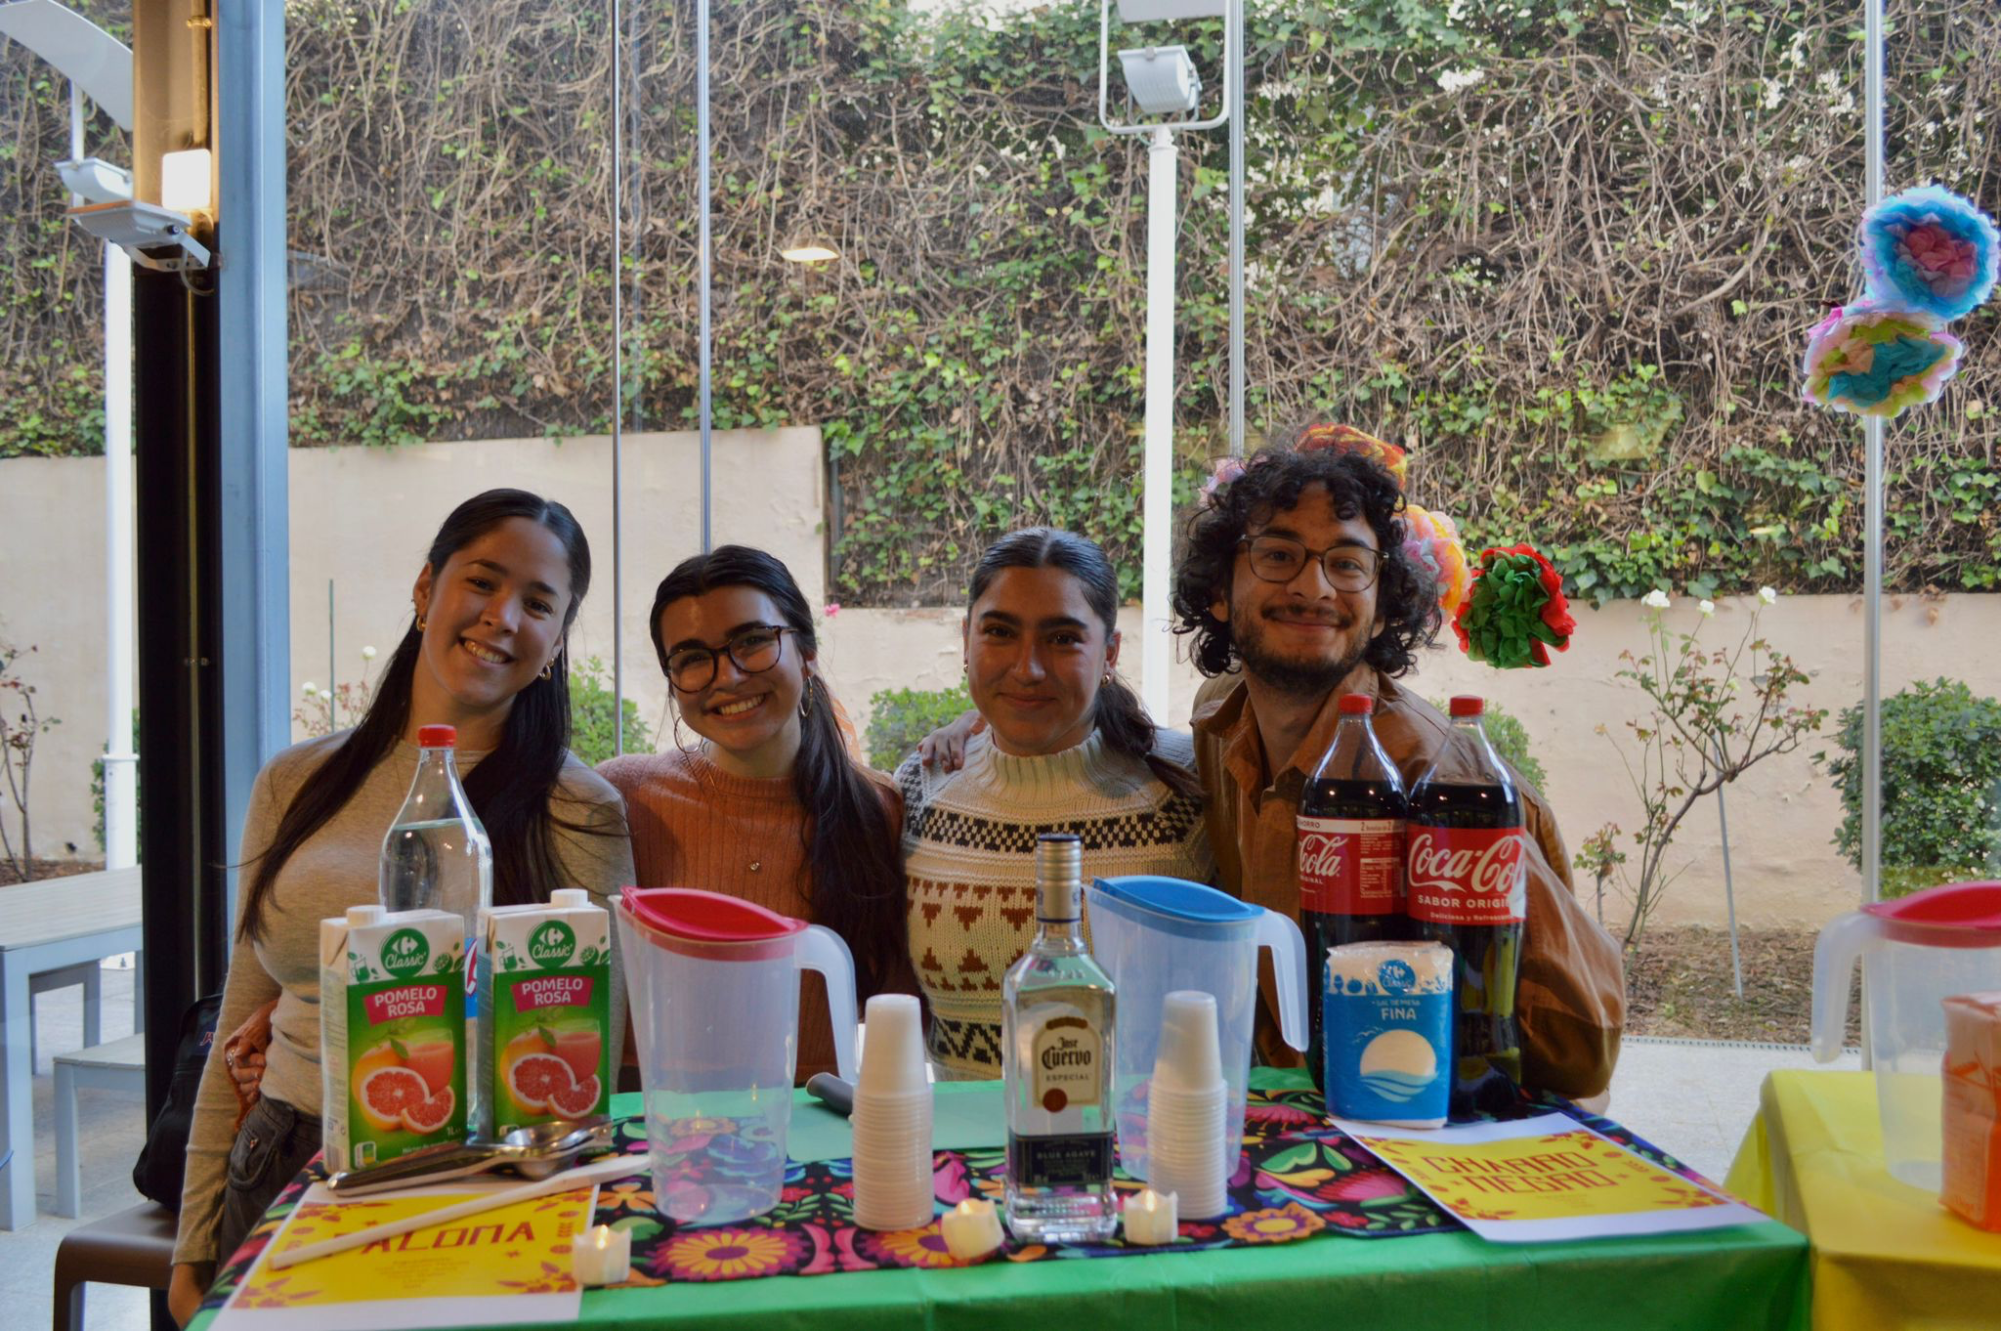 Students+sipped+Pi%C3%B1a+Coladas+and+Palomas+in+the+cafeteria%2C+colorfully+decorated+for+the+drink-tasting+event